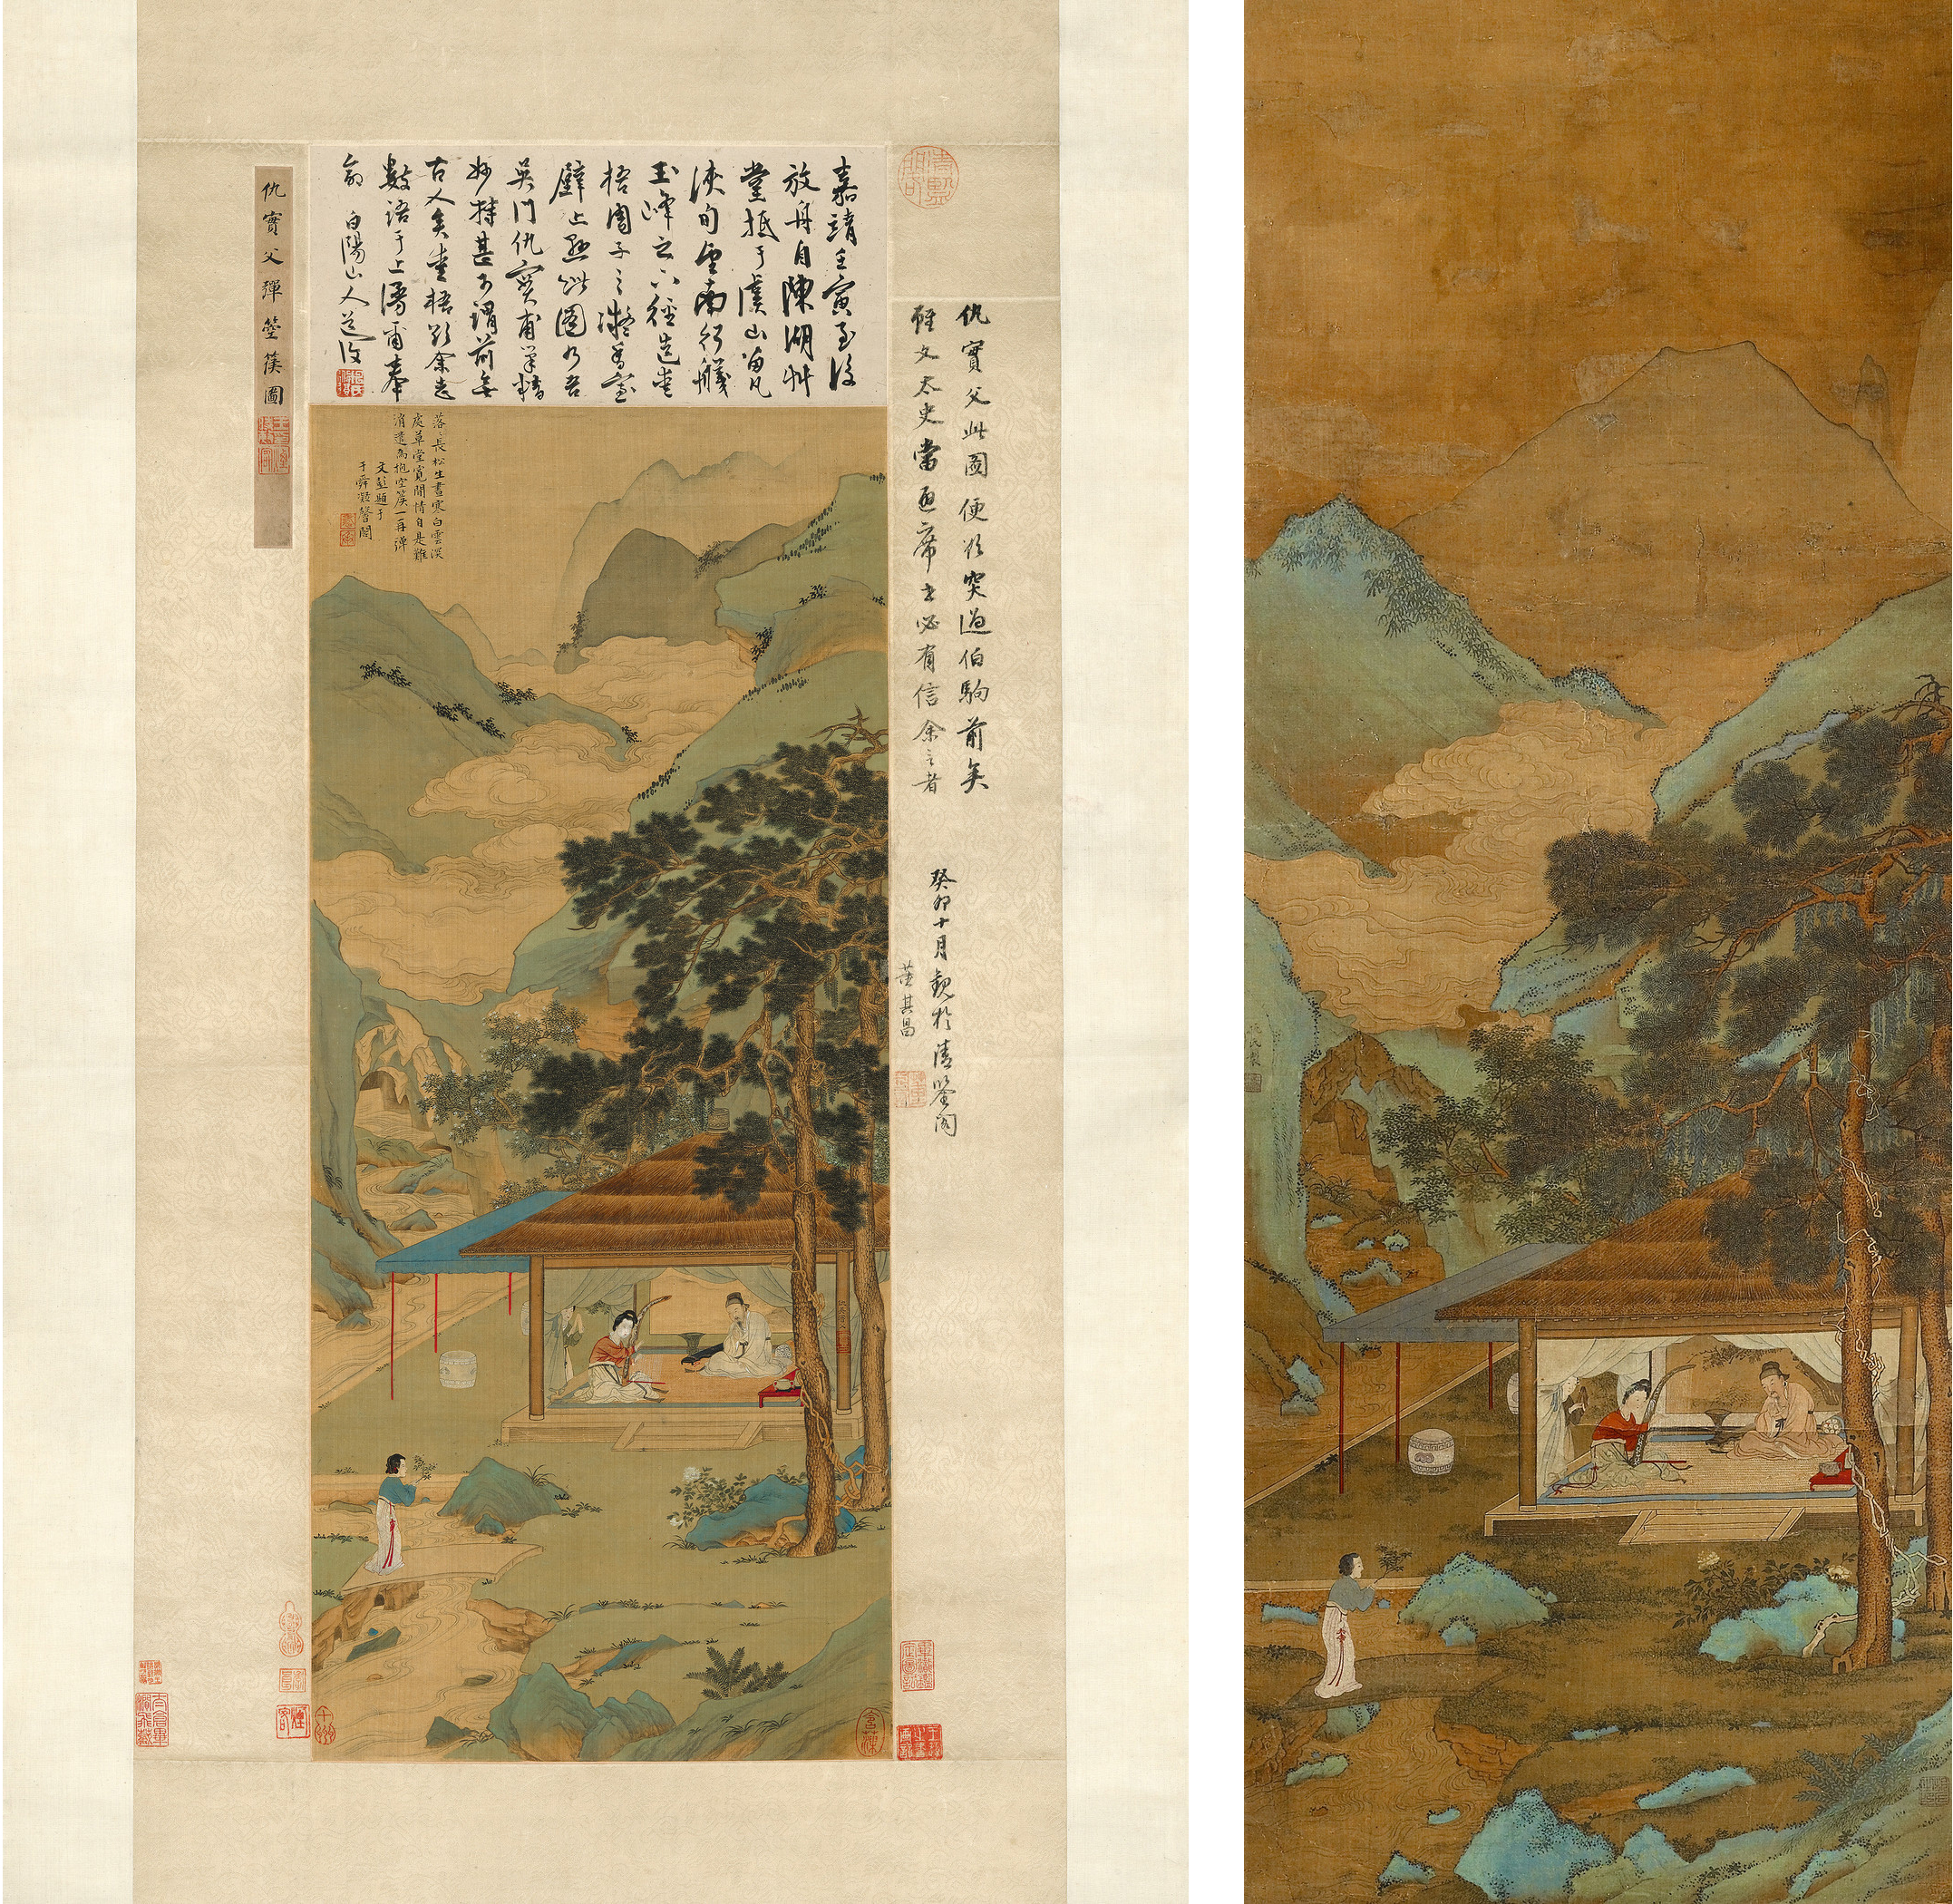 Left: Qiu Ying, Harp Player in a Pavilion, Ming dynasty, c. 1530–35, Museum of Fine Arts, Boston, Special Chinese and Japanese Fund, photography © Museum of Fine Arts, Boston; Right: Qiu Zhu, Playing the Harp, after Qiu Ying, Ming dynasty, mid-16th century, The Walters Art Museum, Baltimore, 35.38, photo courtesy the Walters Art Museum